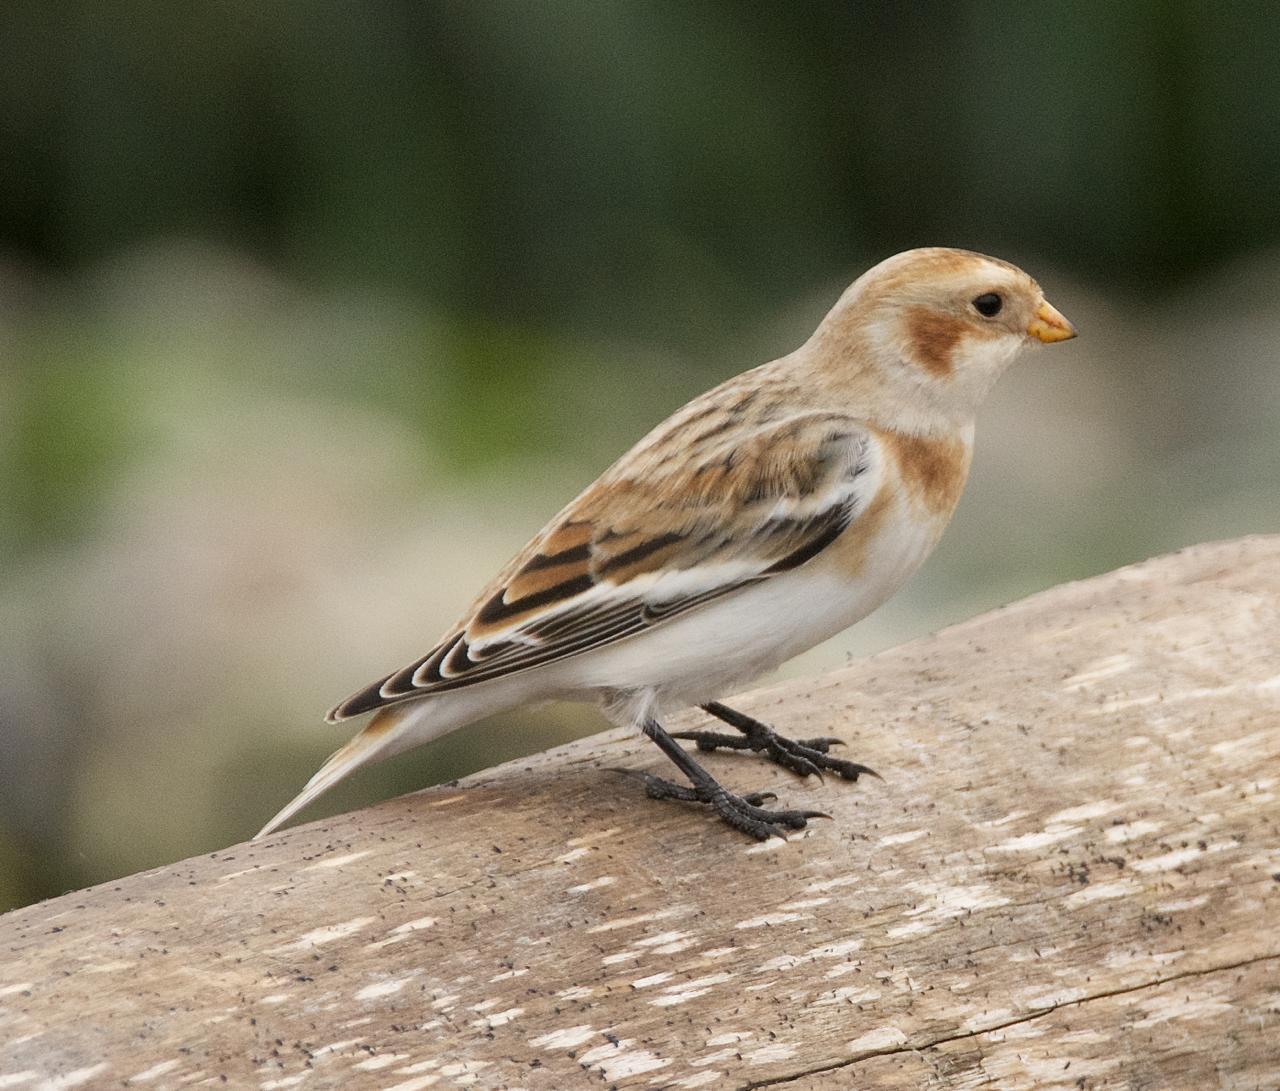 Snow Bunting Photo by Brian Avent